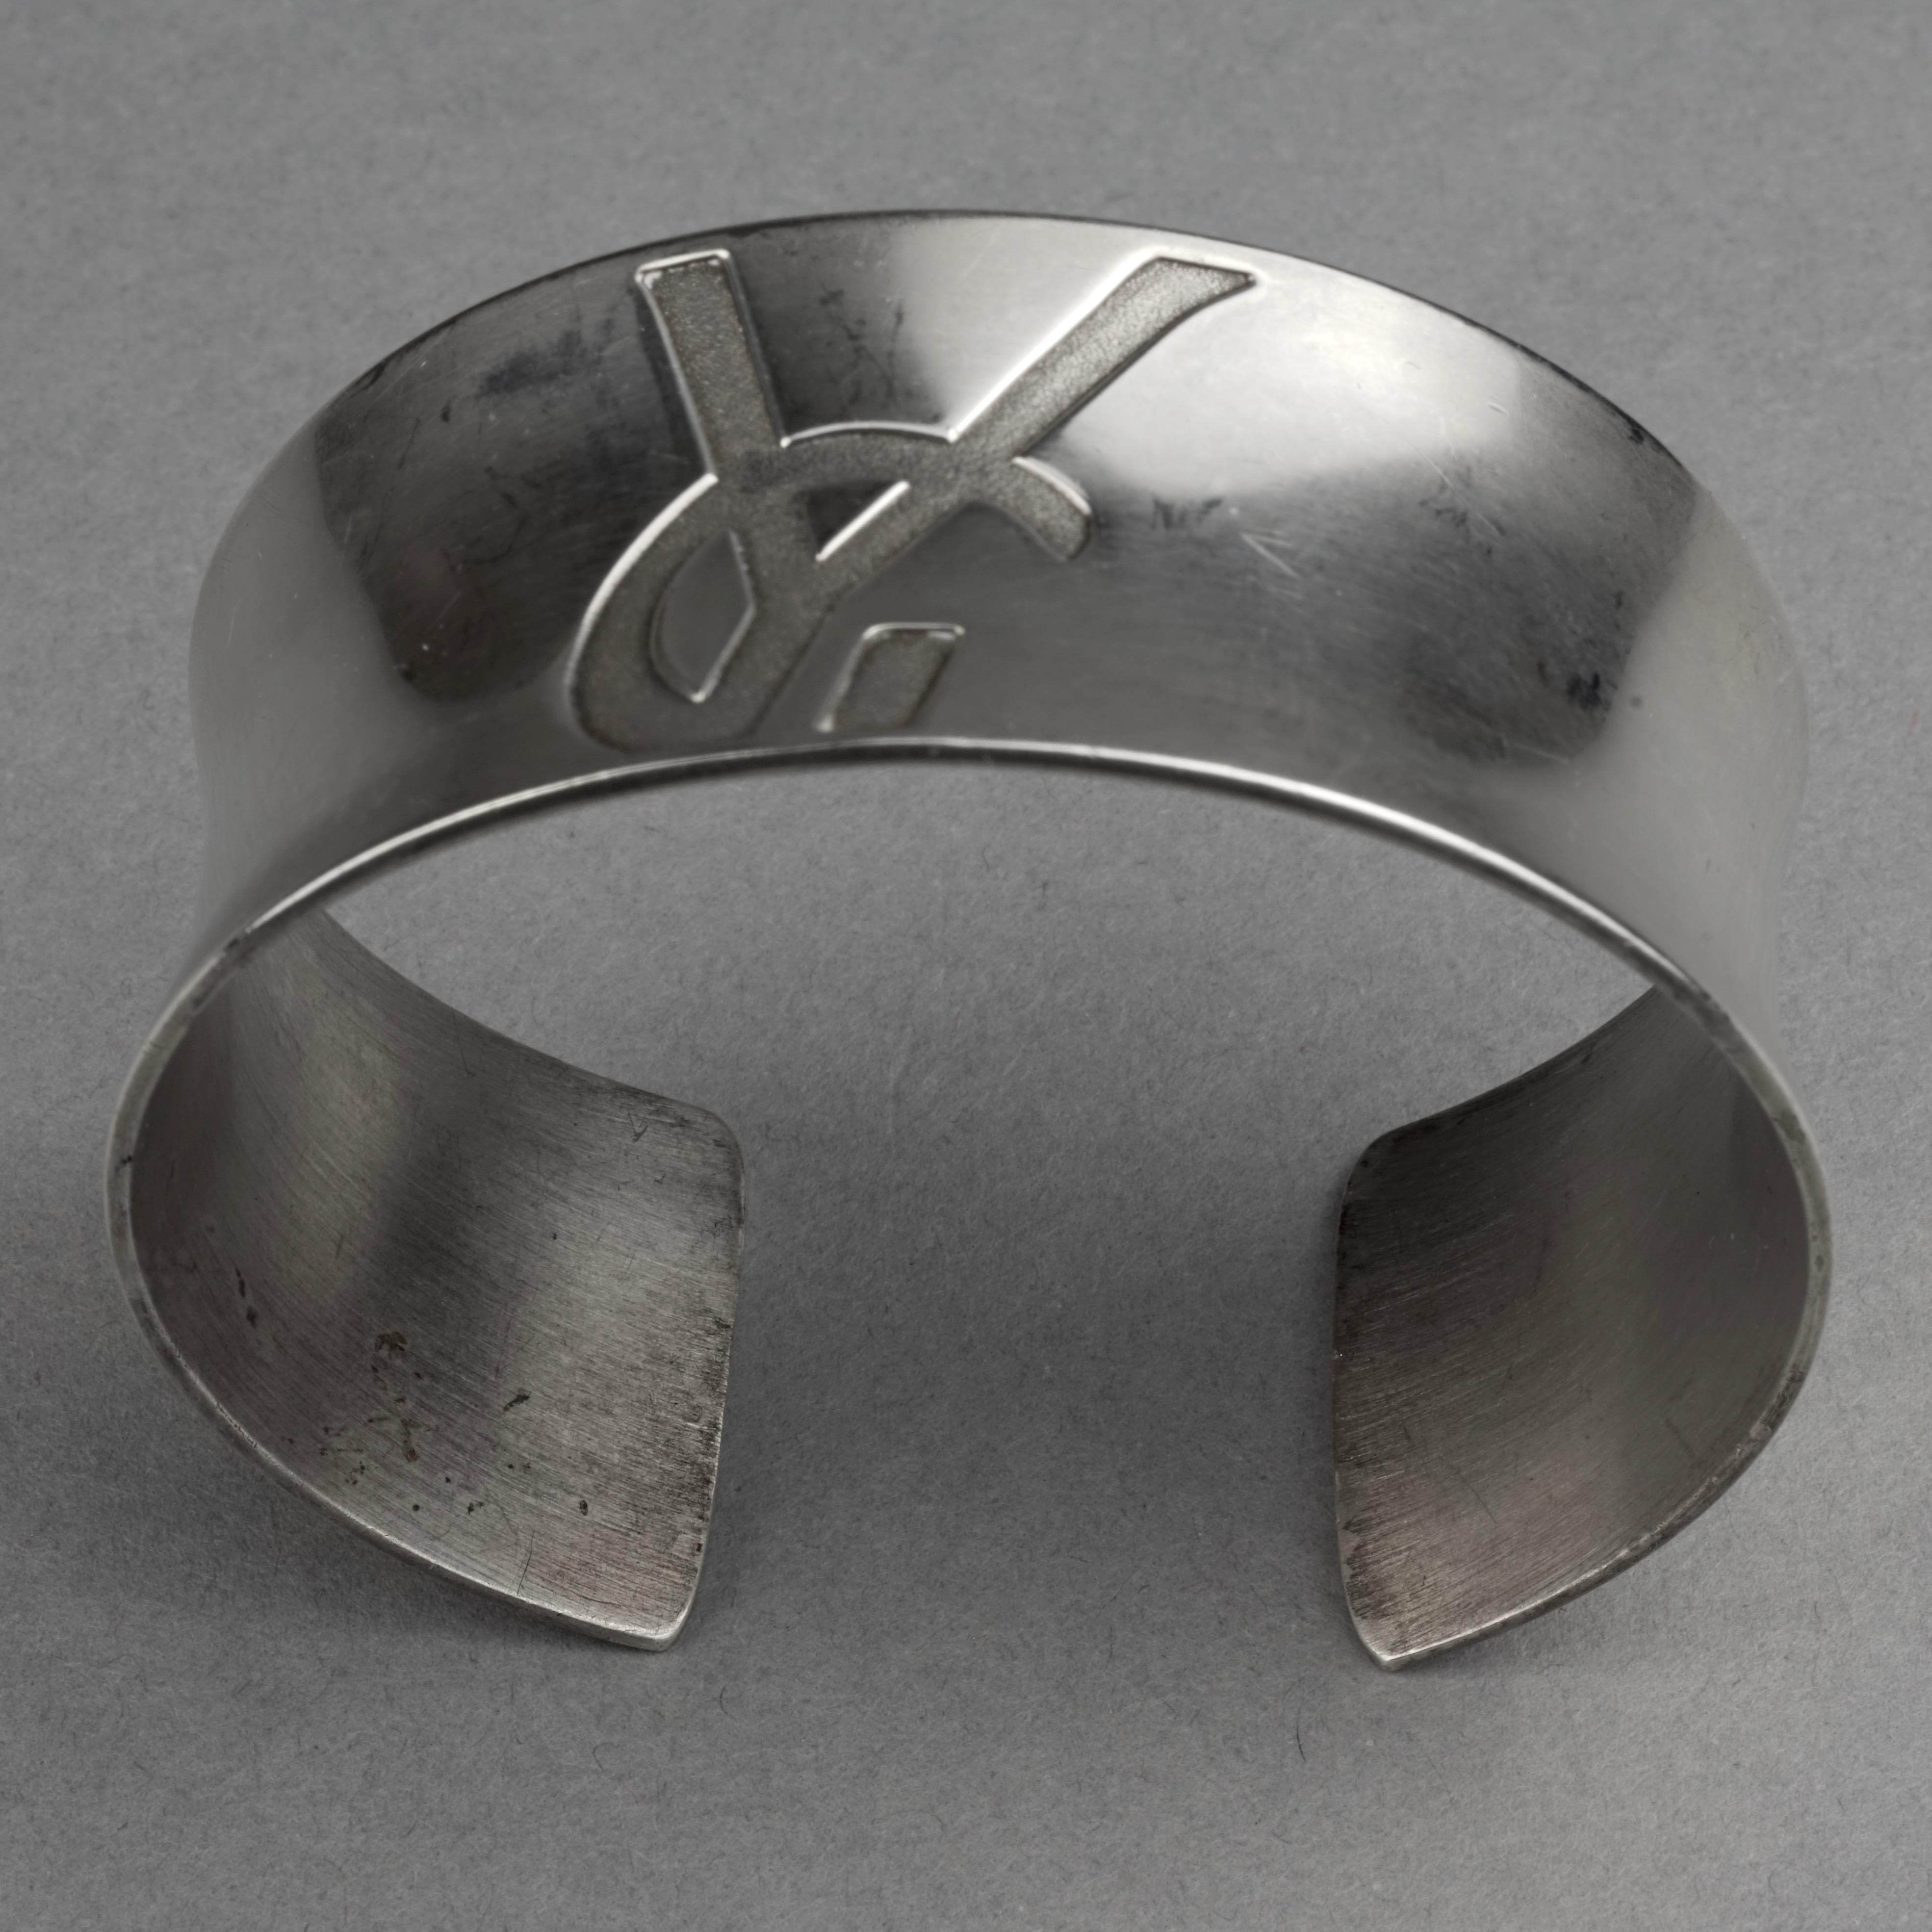 Vintage YVES SAINT LAURENT Ysl Logo Sterling Silver Cuff Bracelet

Measurements:
Height: 1.06 inches (2.7 cm)
Circumference: 6.50 inches (16.5 cm)

Features:
- 100% Authentic YVES SAINT LAURENT.
- Sterling silver cuff bracelet with engraved YSL logo